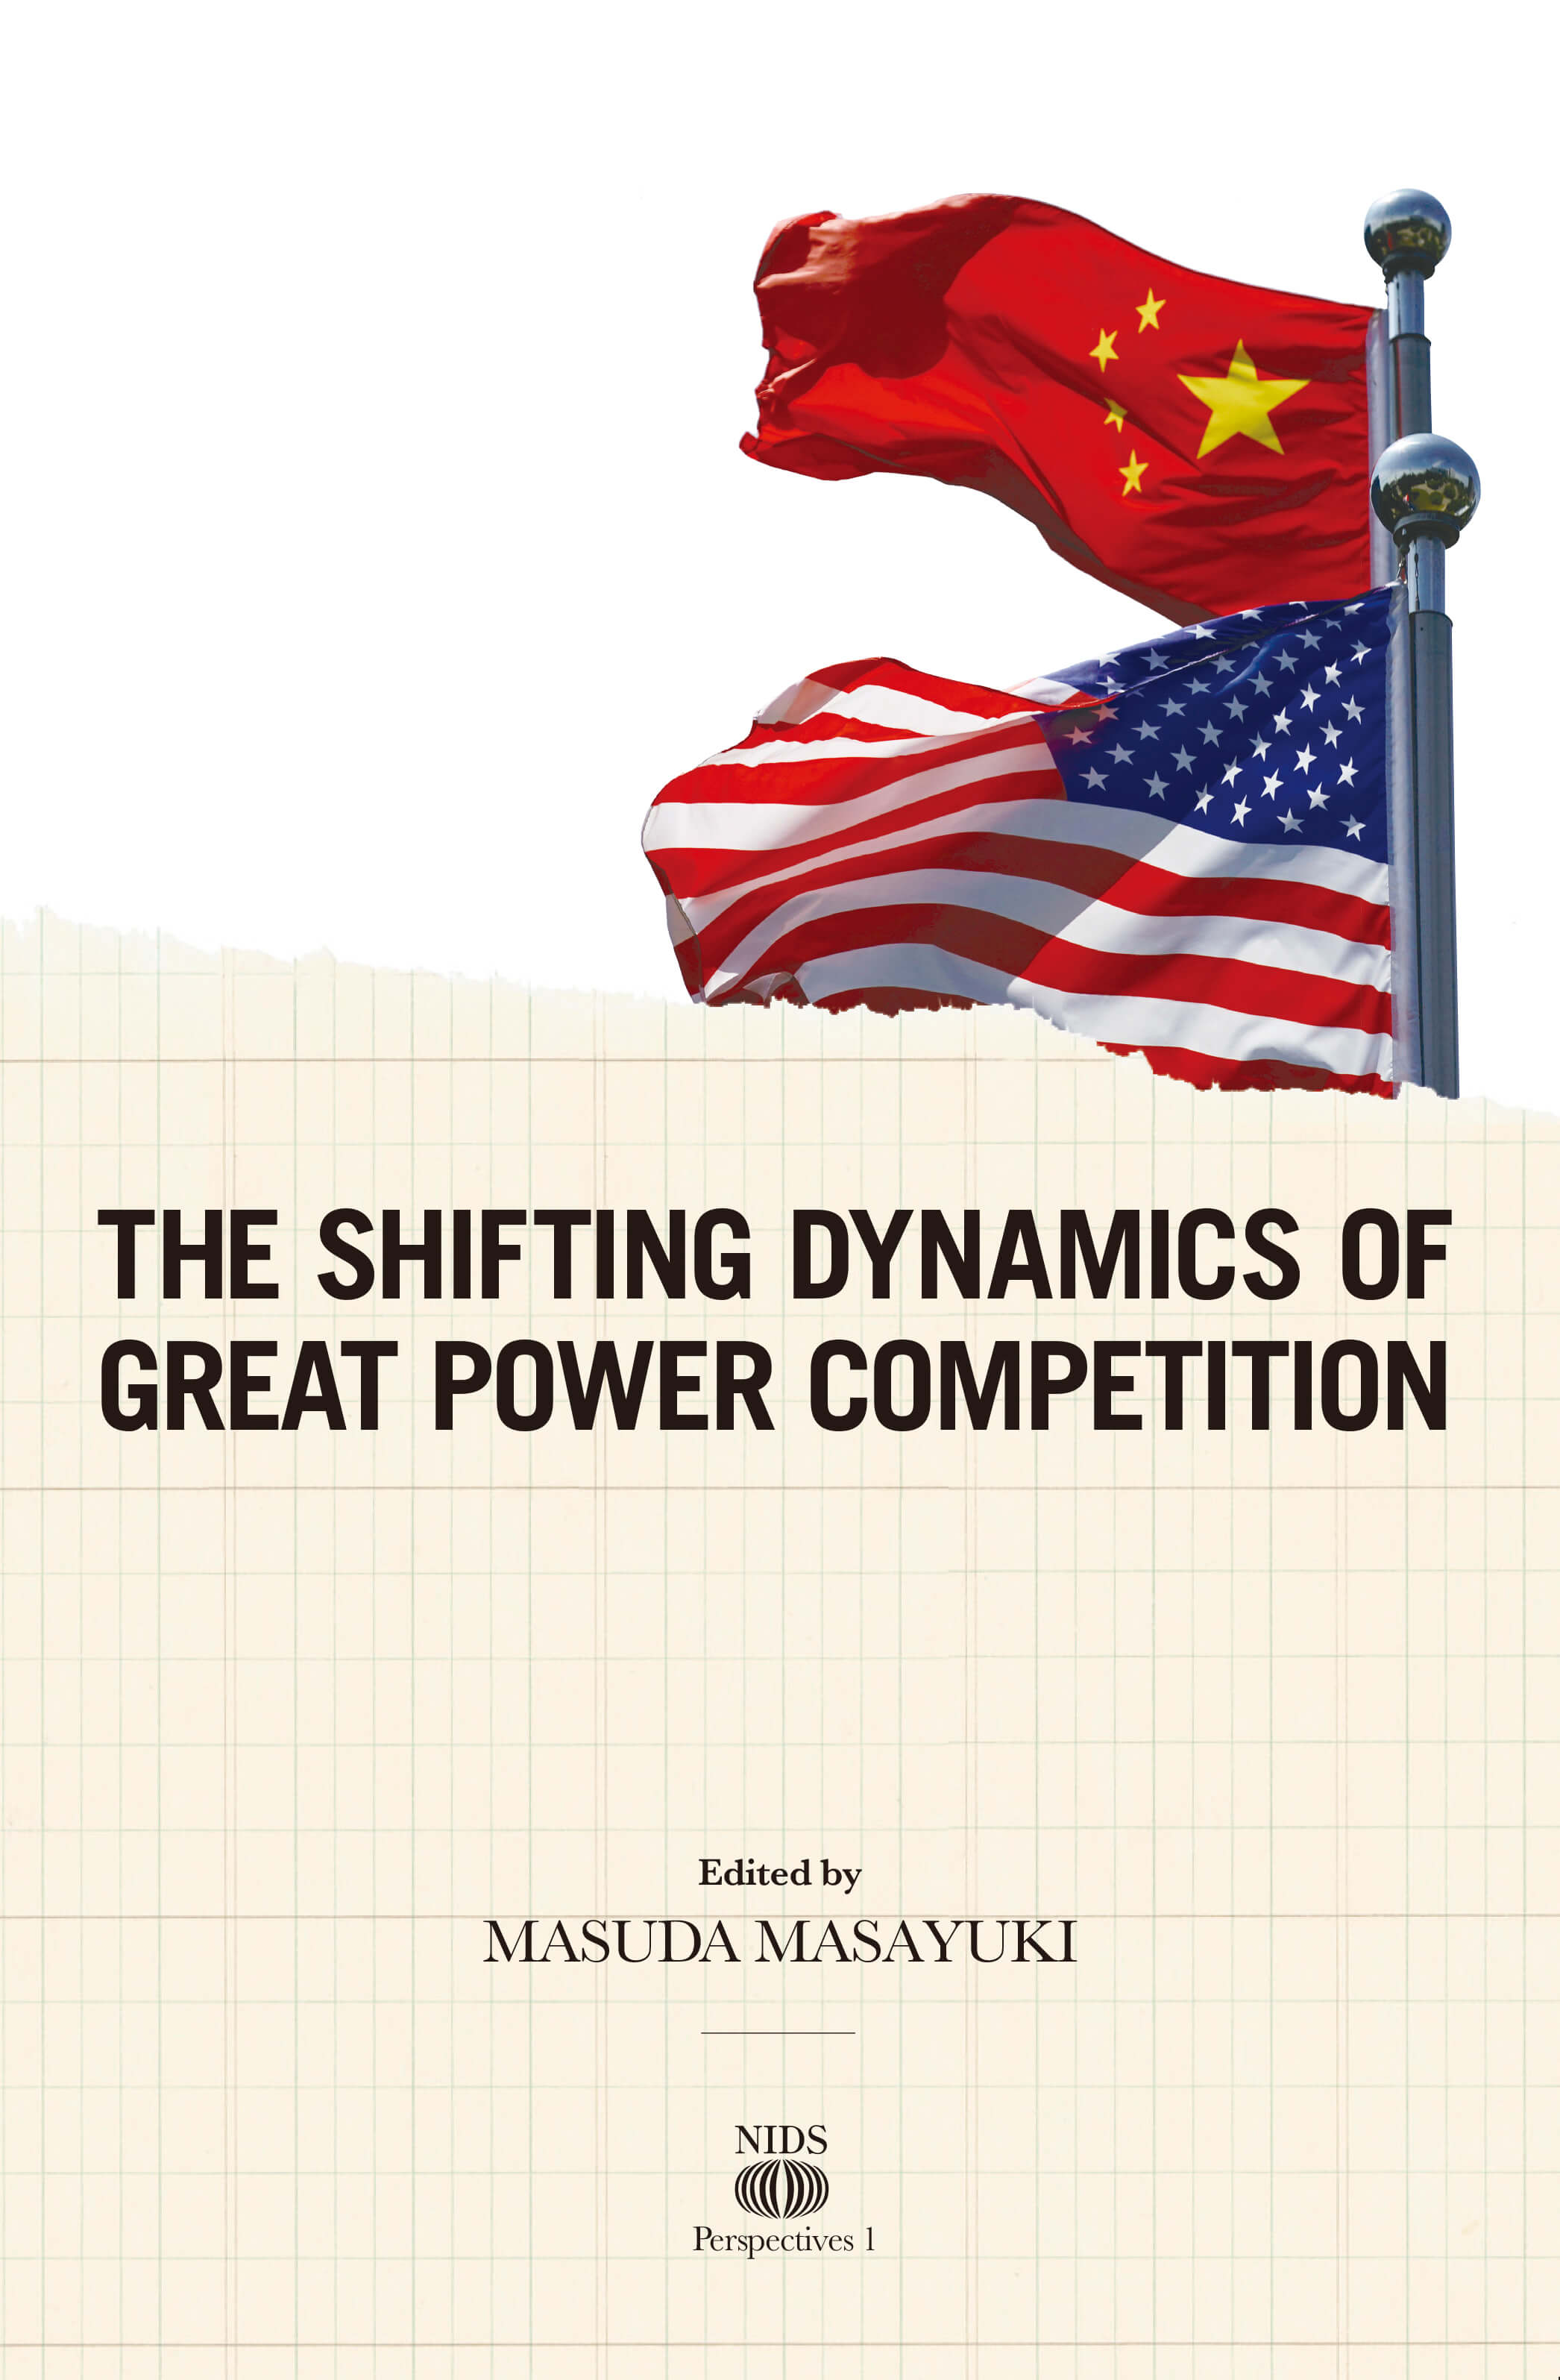 THE SHIFTING DYNAMICS OF GREAT POWER COMPETITION